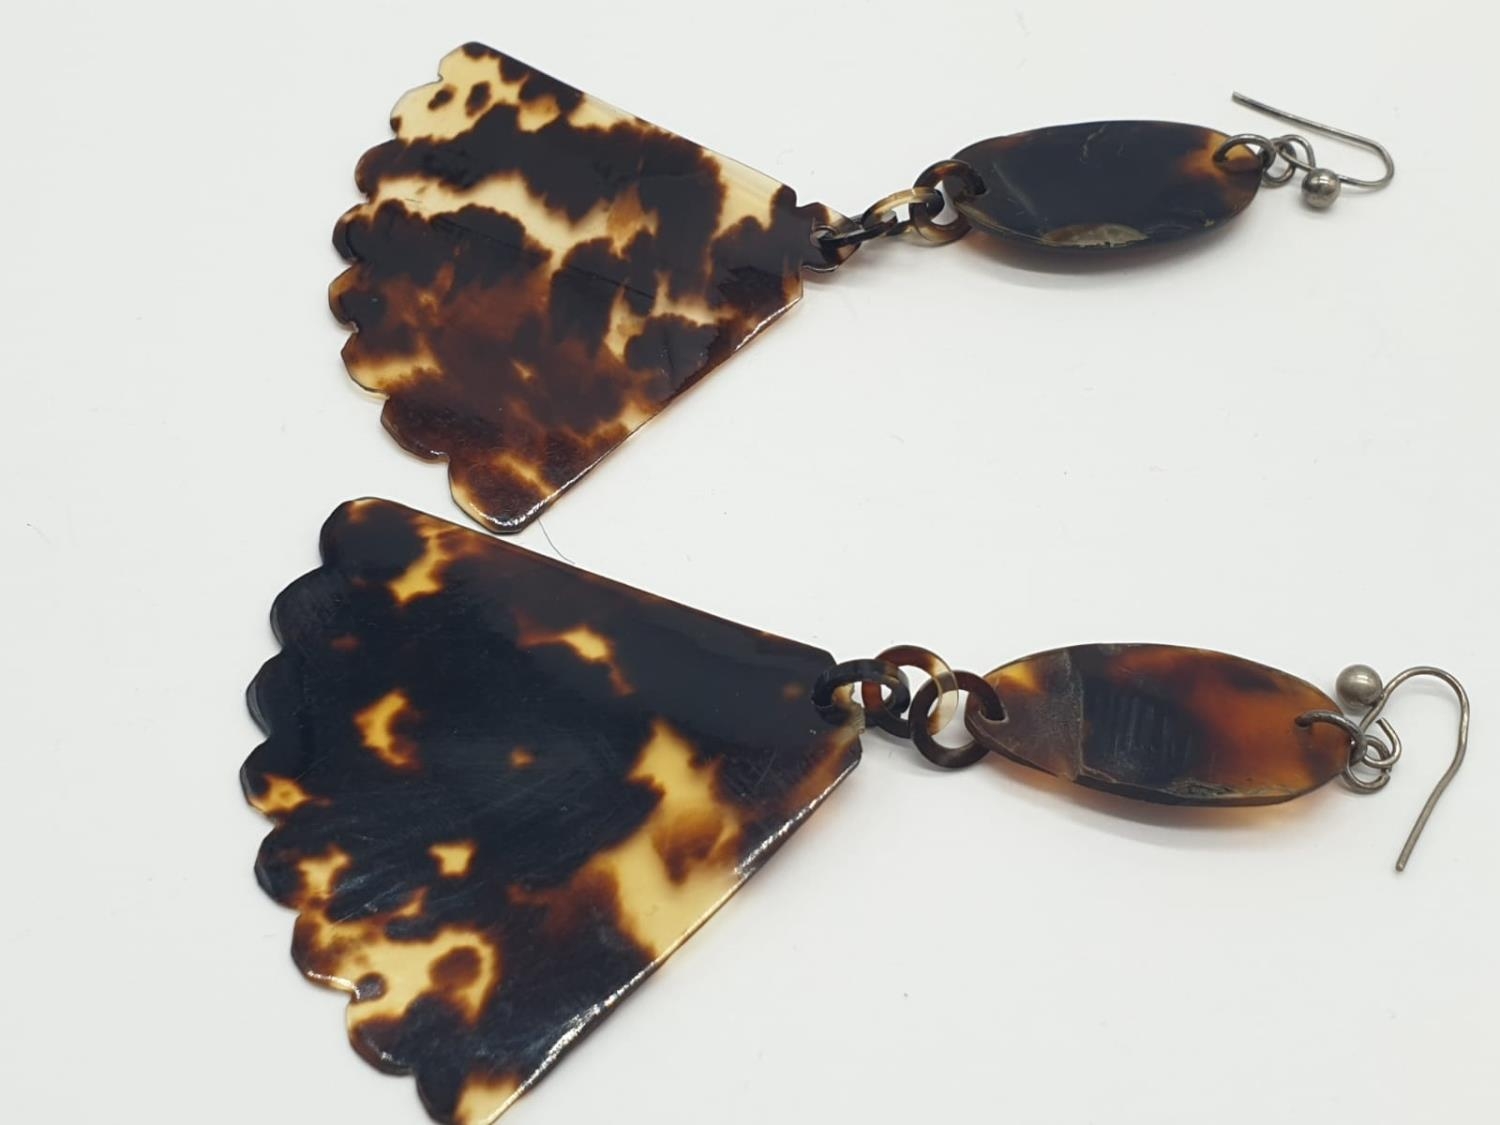 Tortoiseshell and silver earrings. 4.2g in weight. 8cm drop. - Image 2 of 4